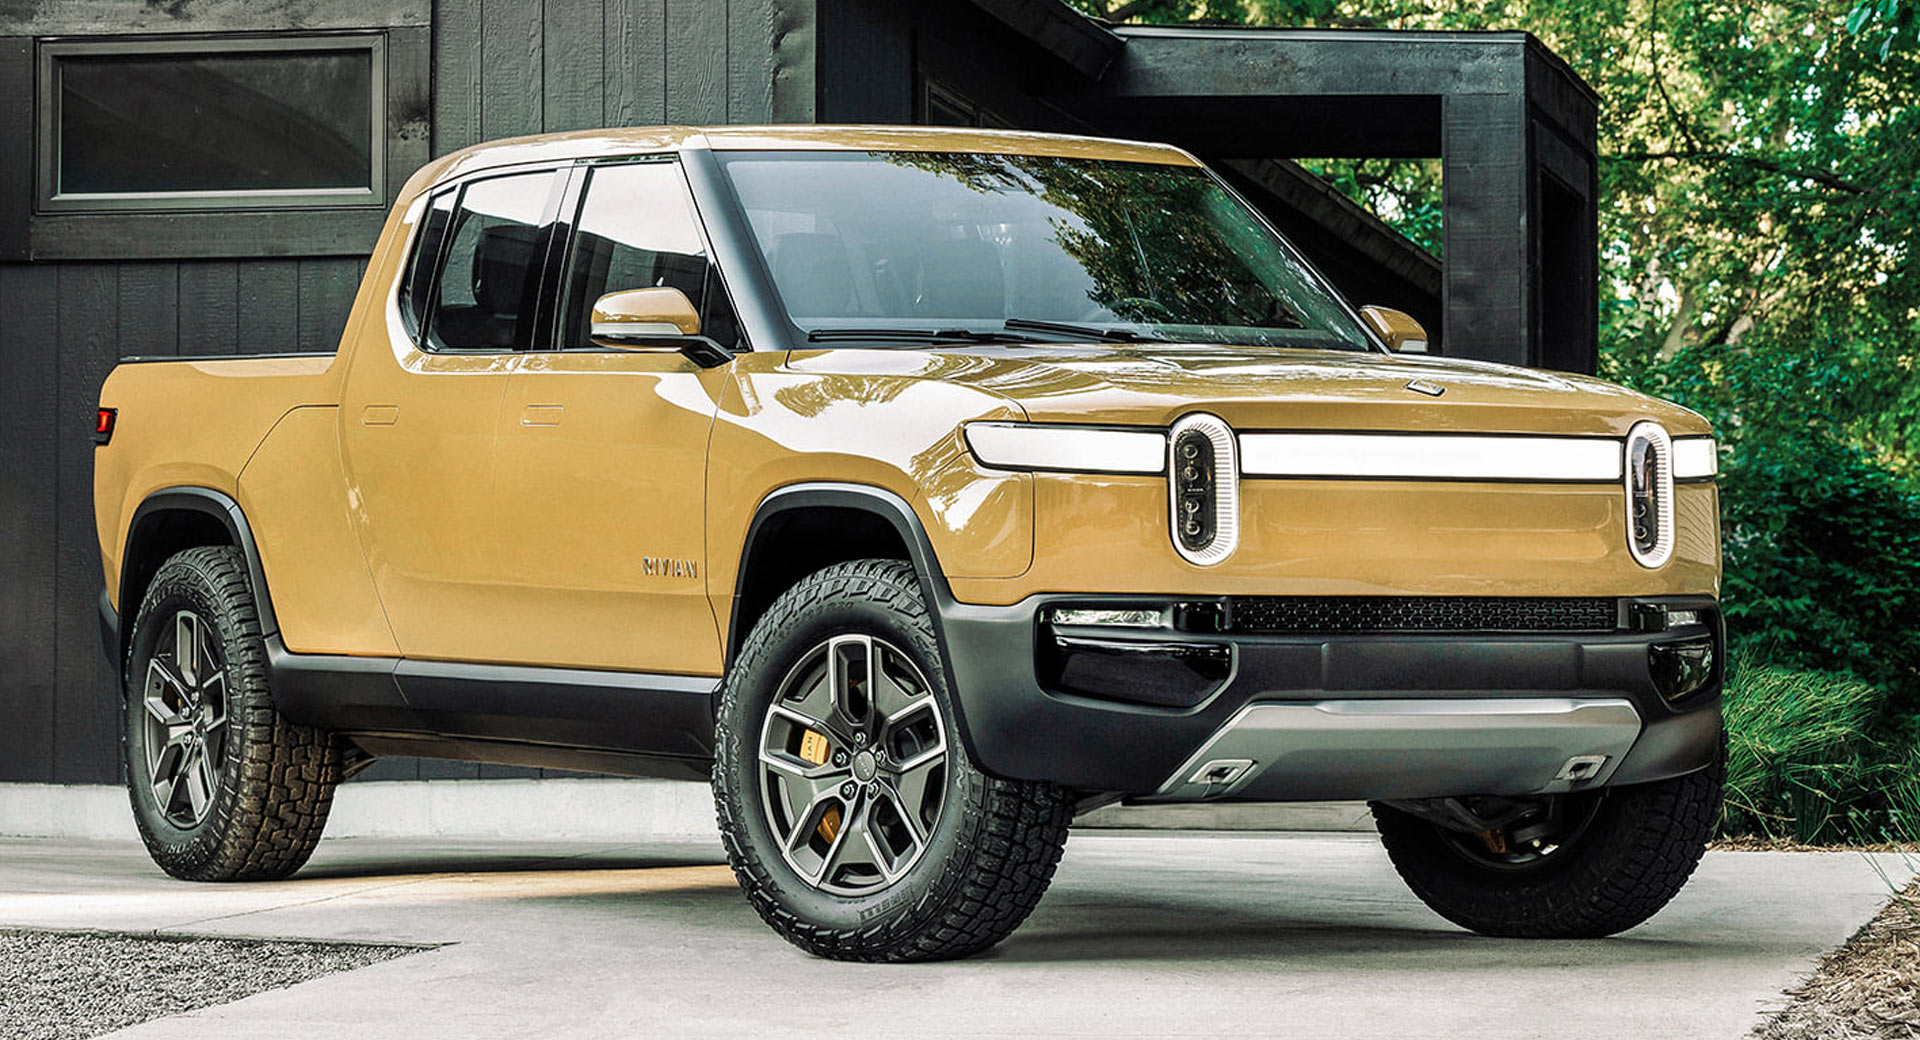 rivian-r1t-deliveries-pushed-back-to-june-2021-due-to-coronavirus